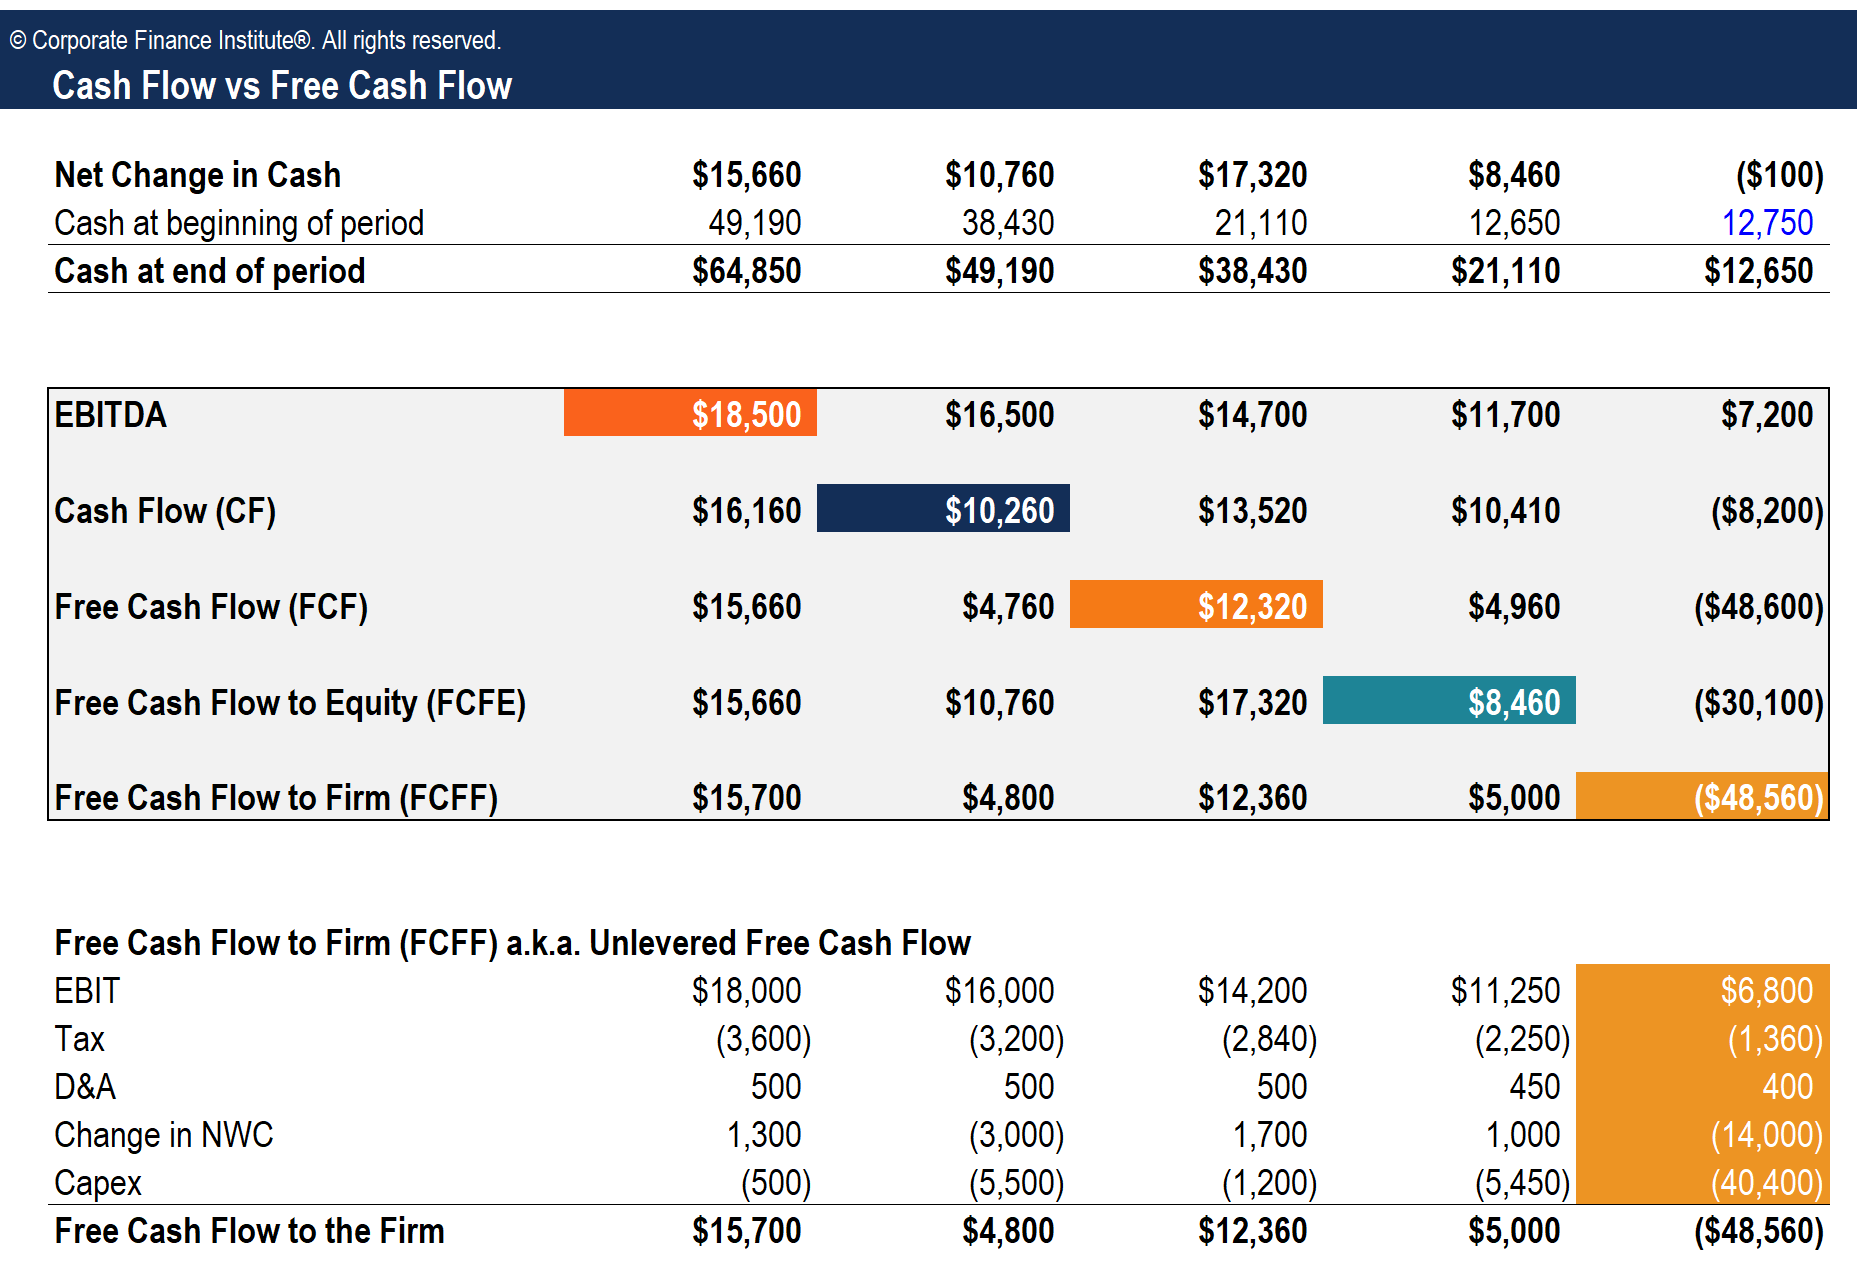 Cash Flow Reconciliation Template - Download Free Excel Template Within Business Cash Flow Analysis Template In Business Cash Flow Analysis Template